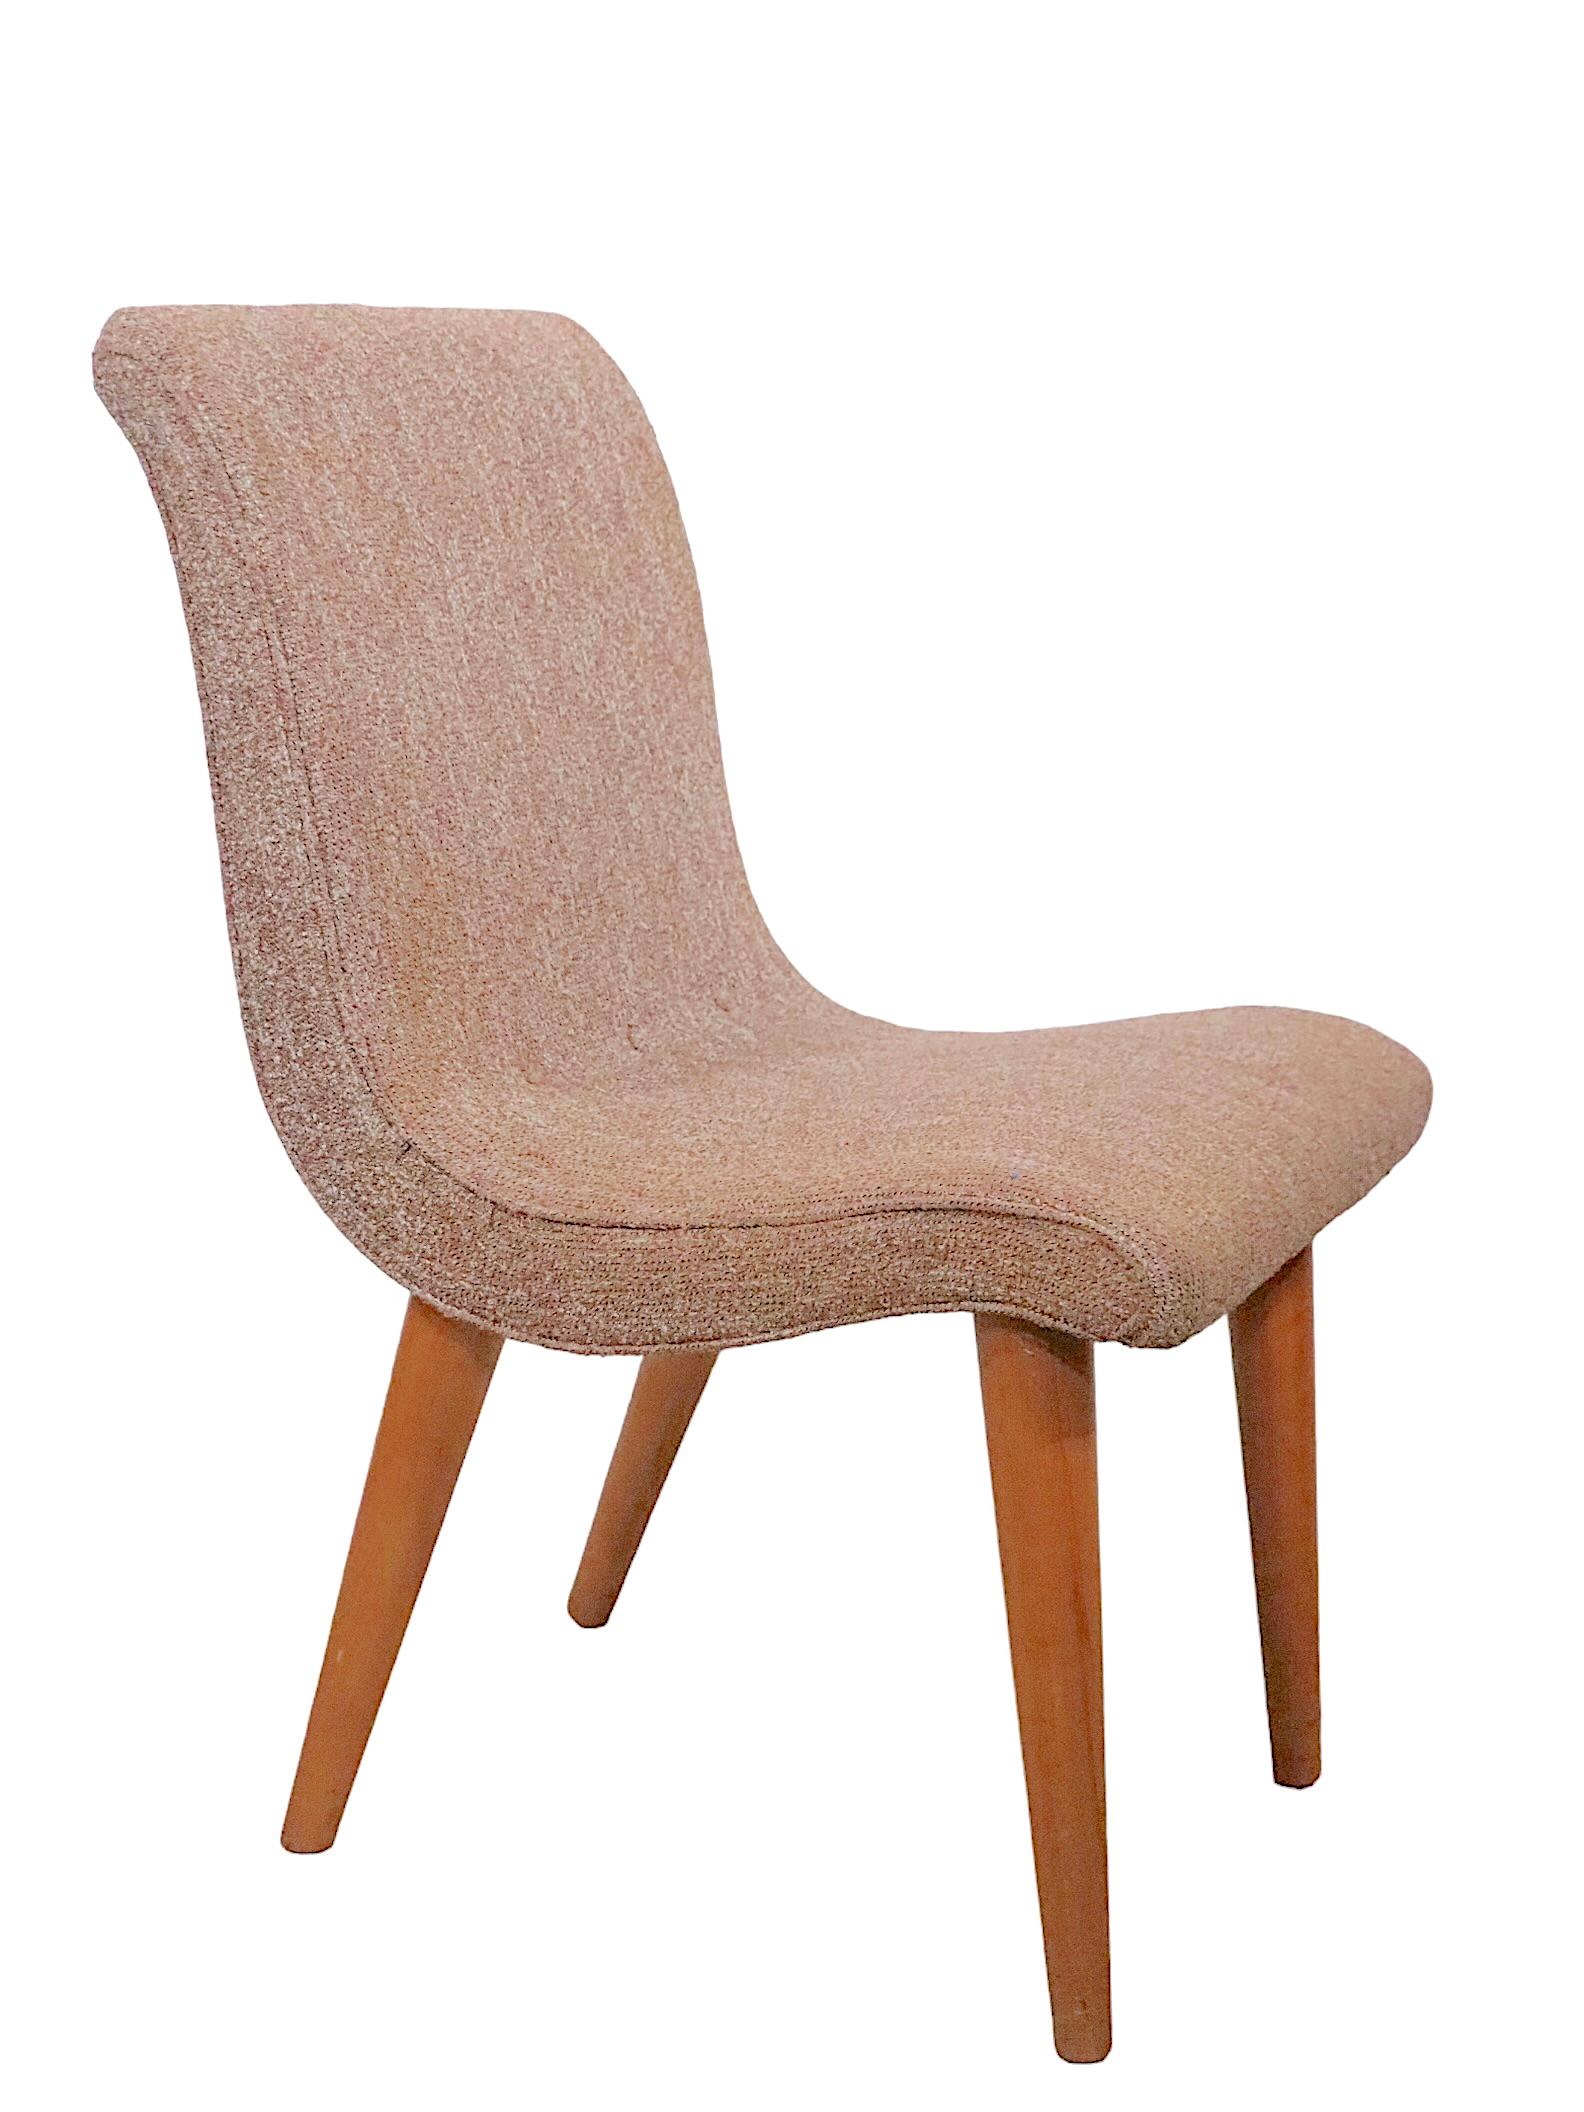 Mid Century Side Dining Chair by Leslie Diamond for Conant Ball Modern Mates  In Good Condition For Sale In New York, NY